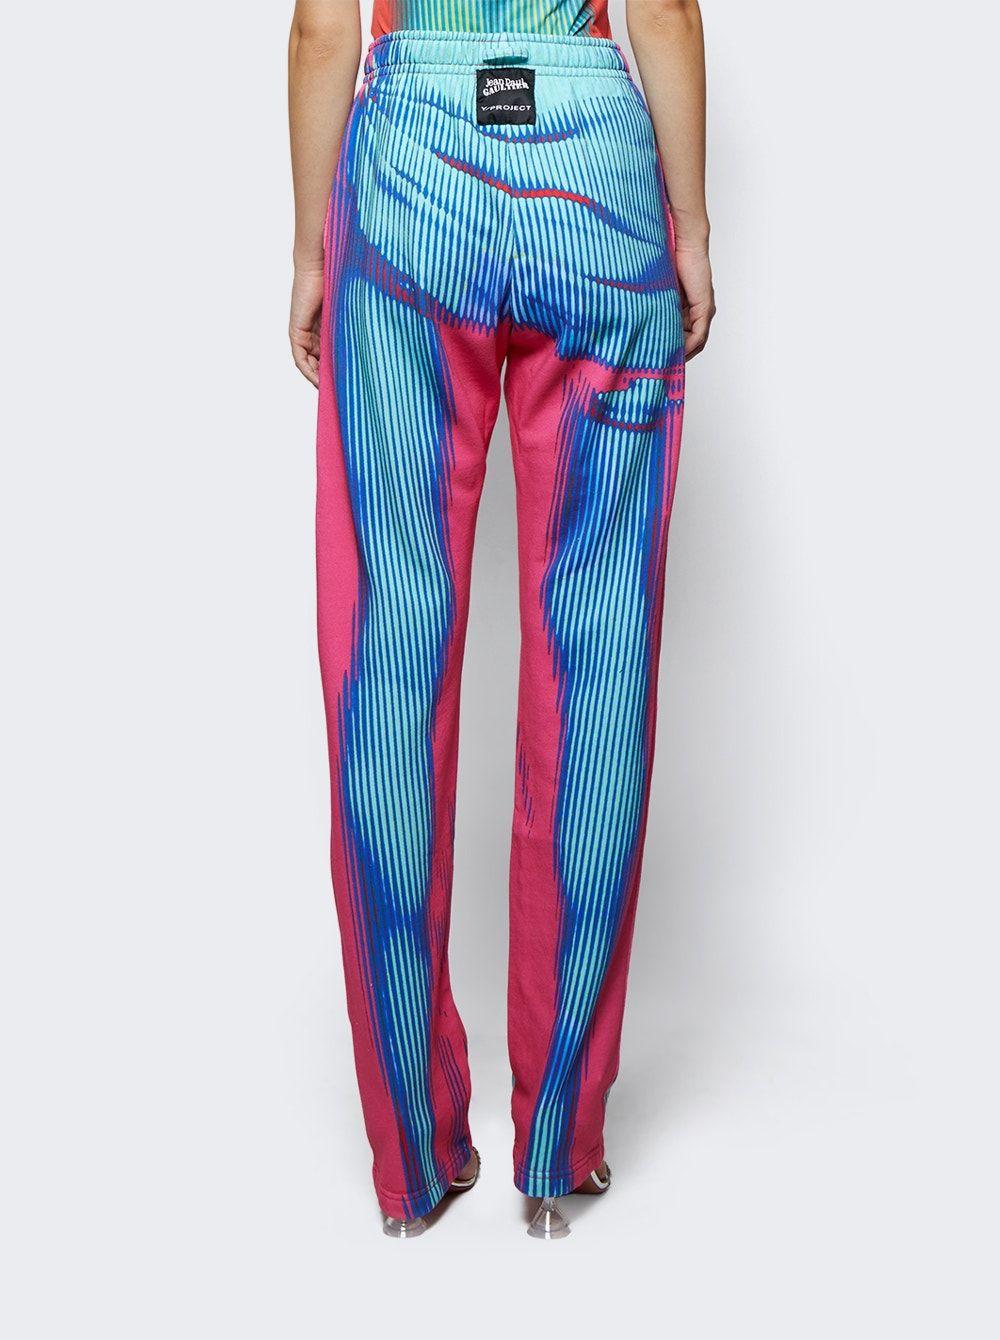 Y. Project X Jean Paul Gaultier Body Morph Sweatpants Pink And Blue | Lyst